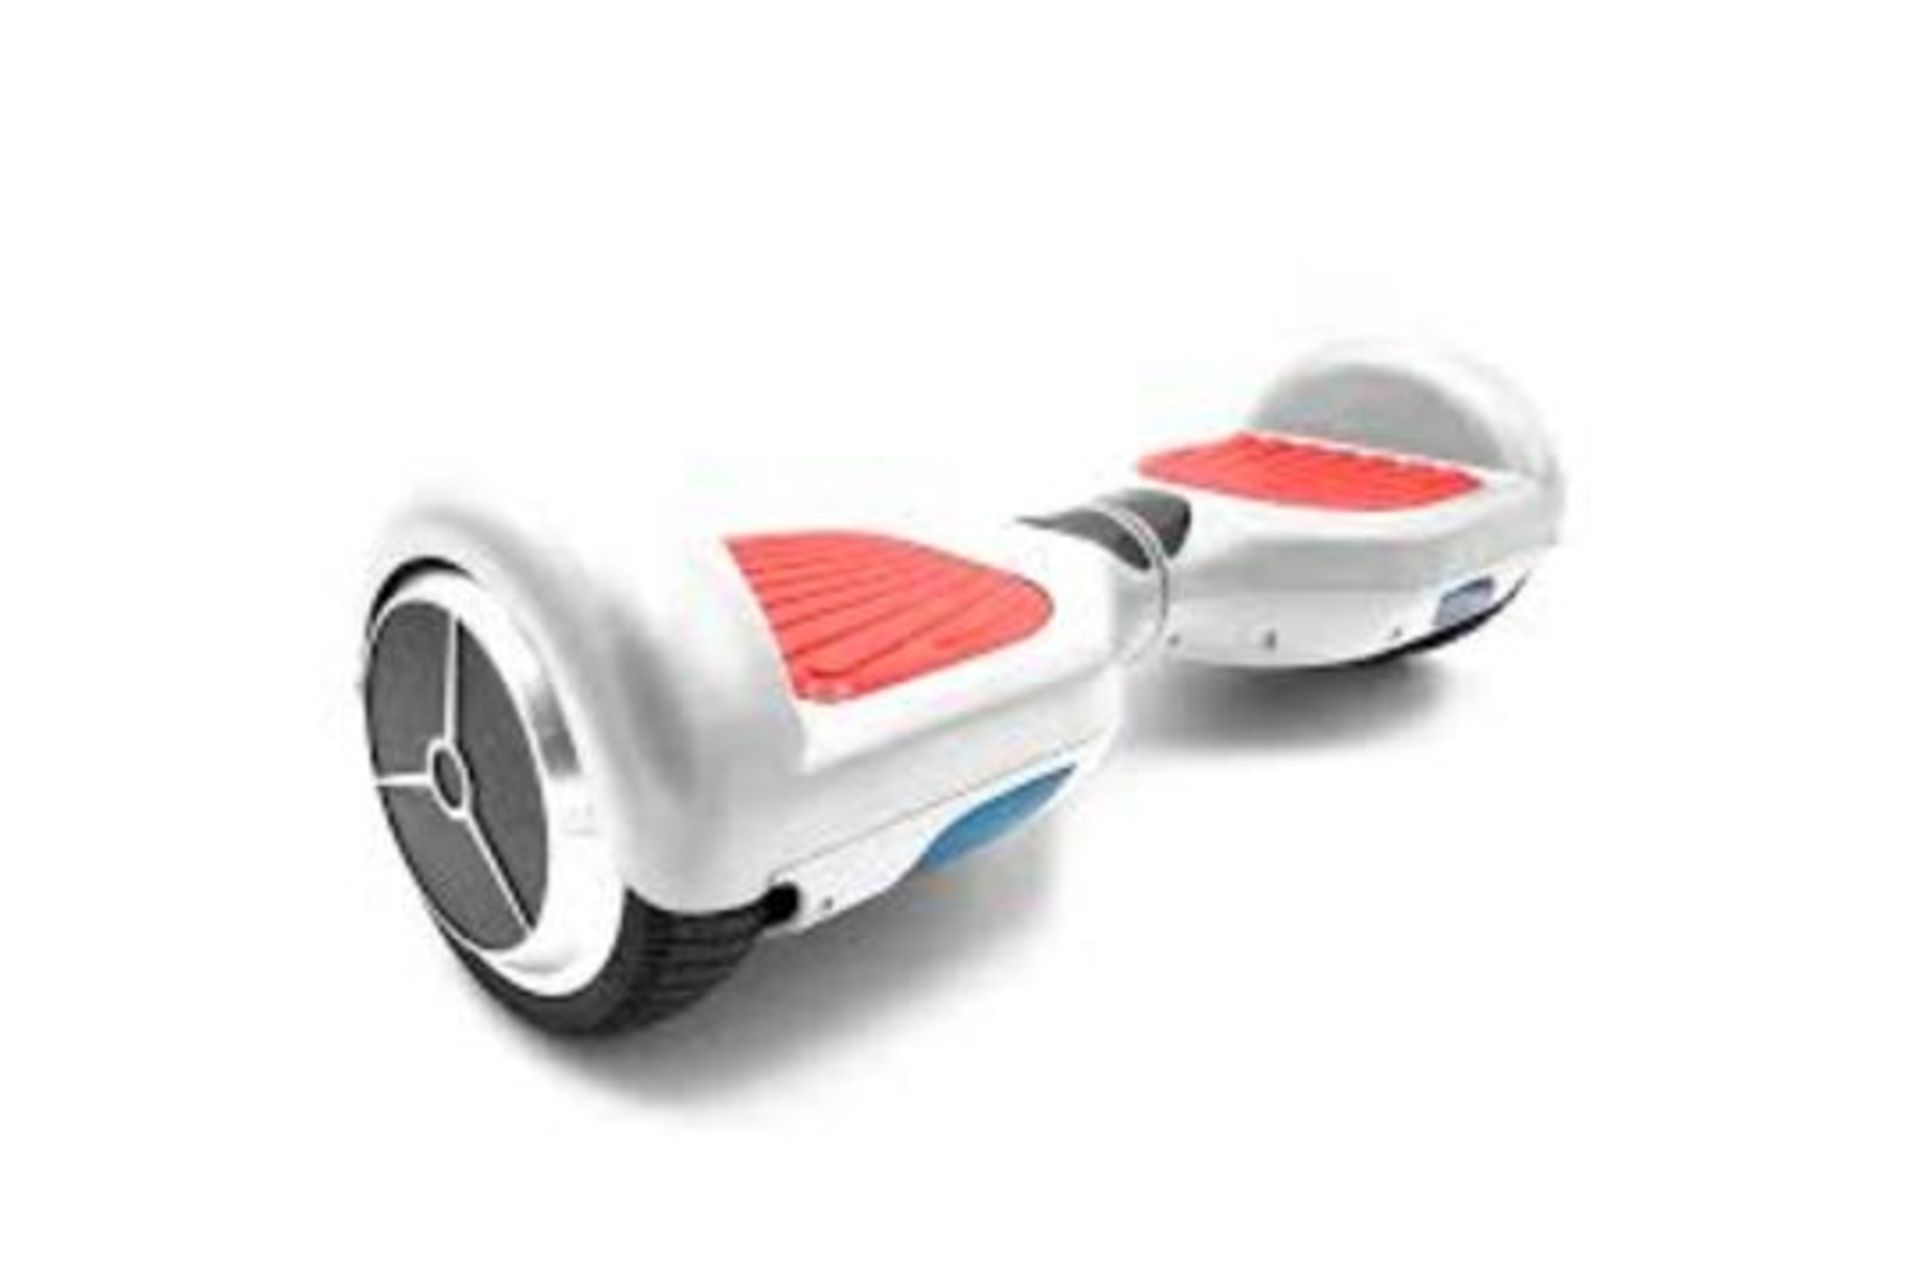 BRAND NEW MEKATRON 6 HOVERBOARD WHITE